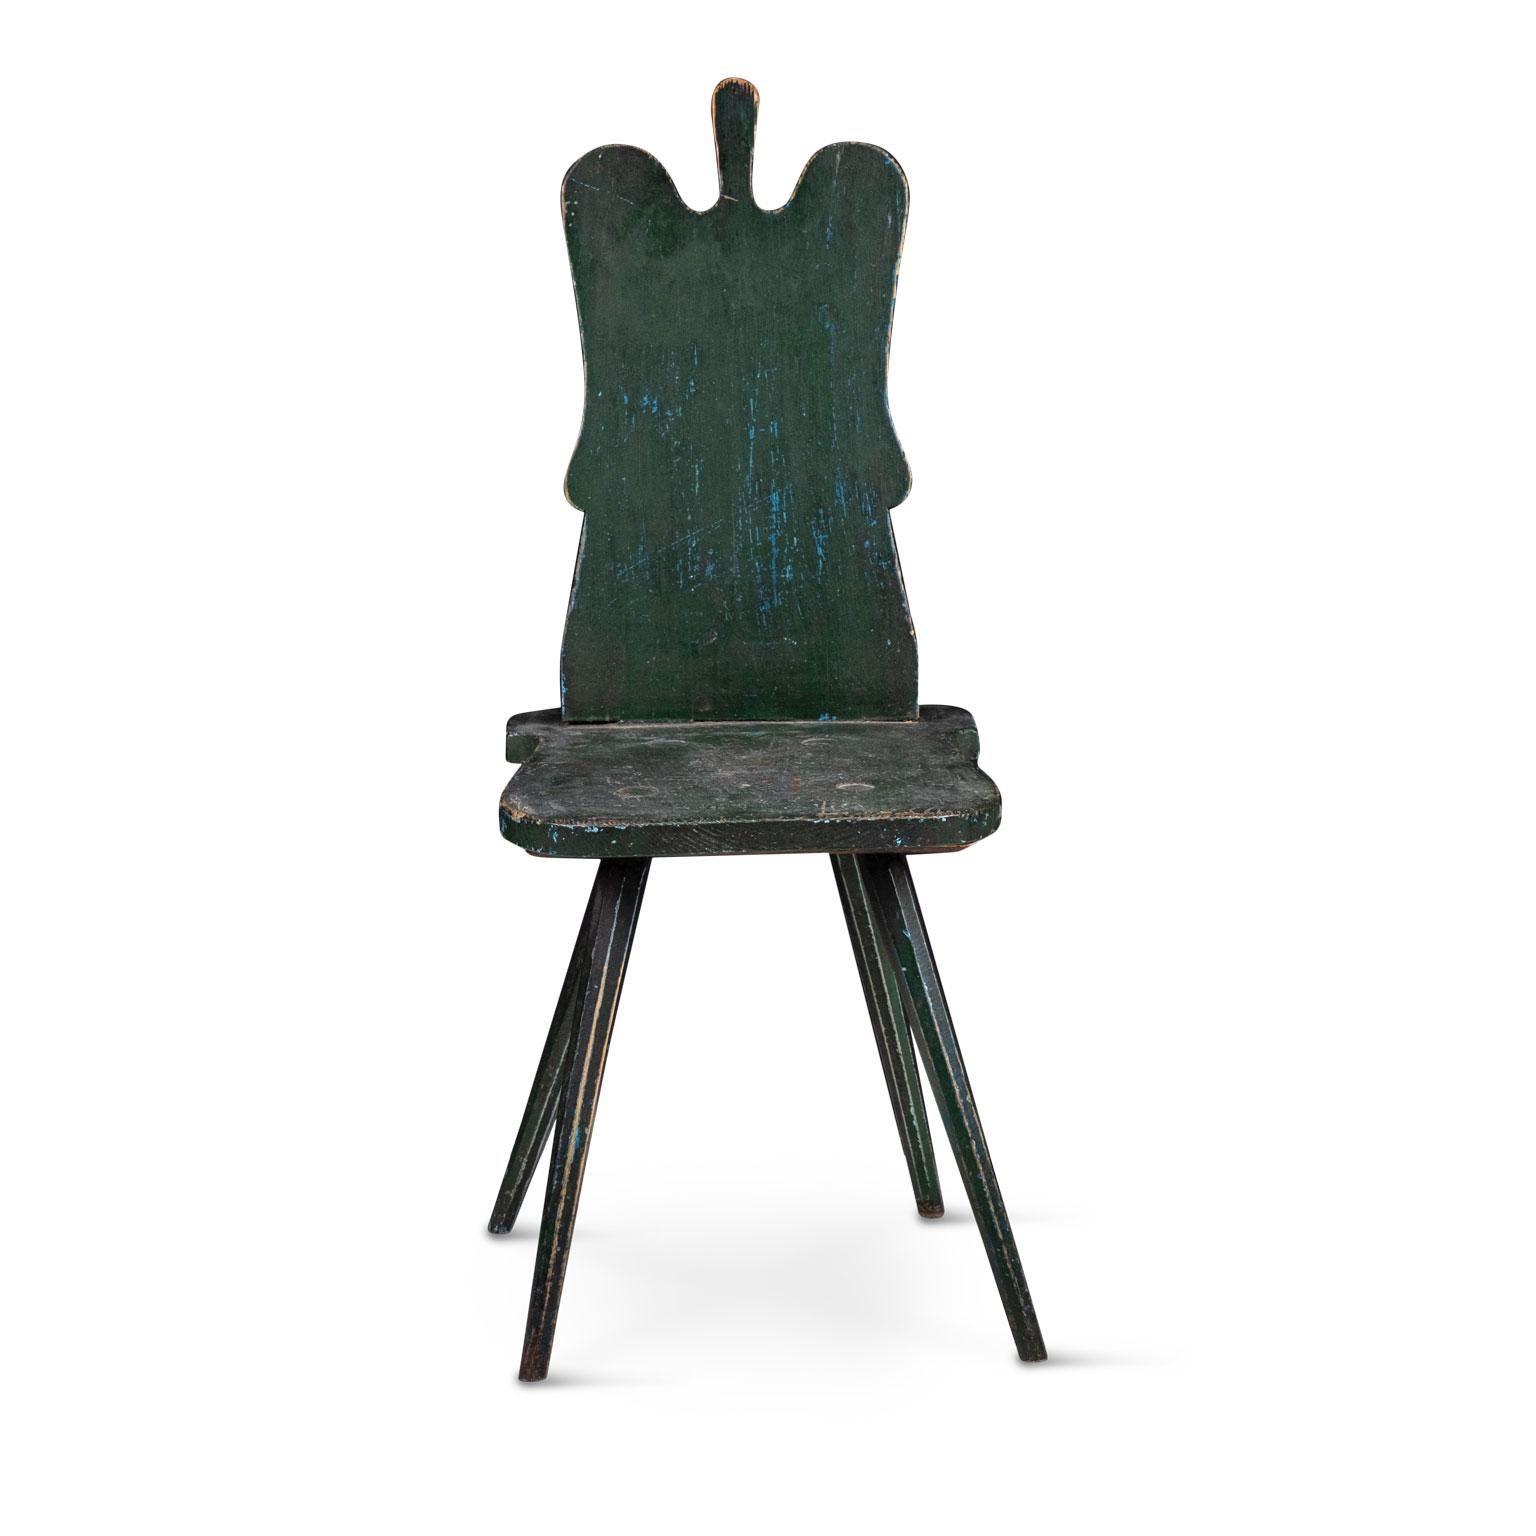 Green painted Swedish Folk Art chair, circa 1780. Pegged construction vernacular side chair in layers of early milk paint: green over blues.